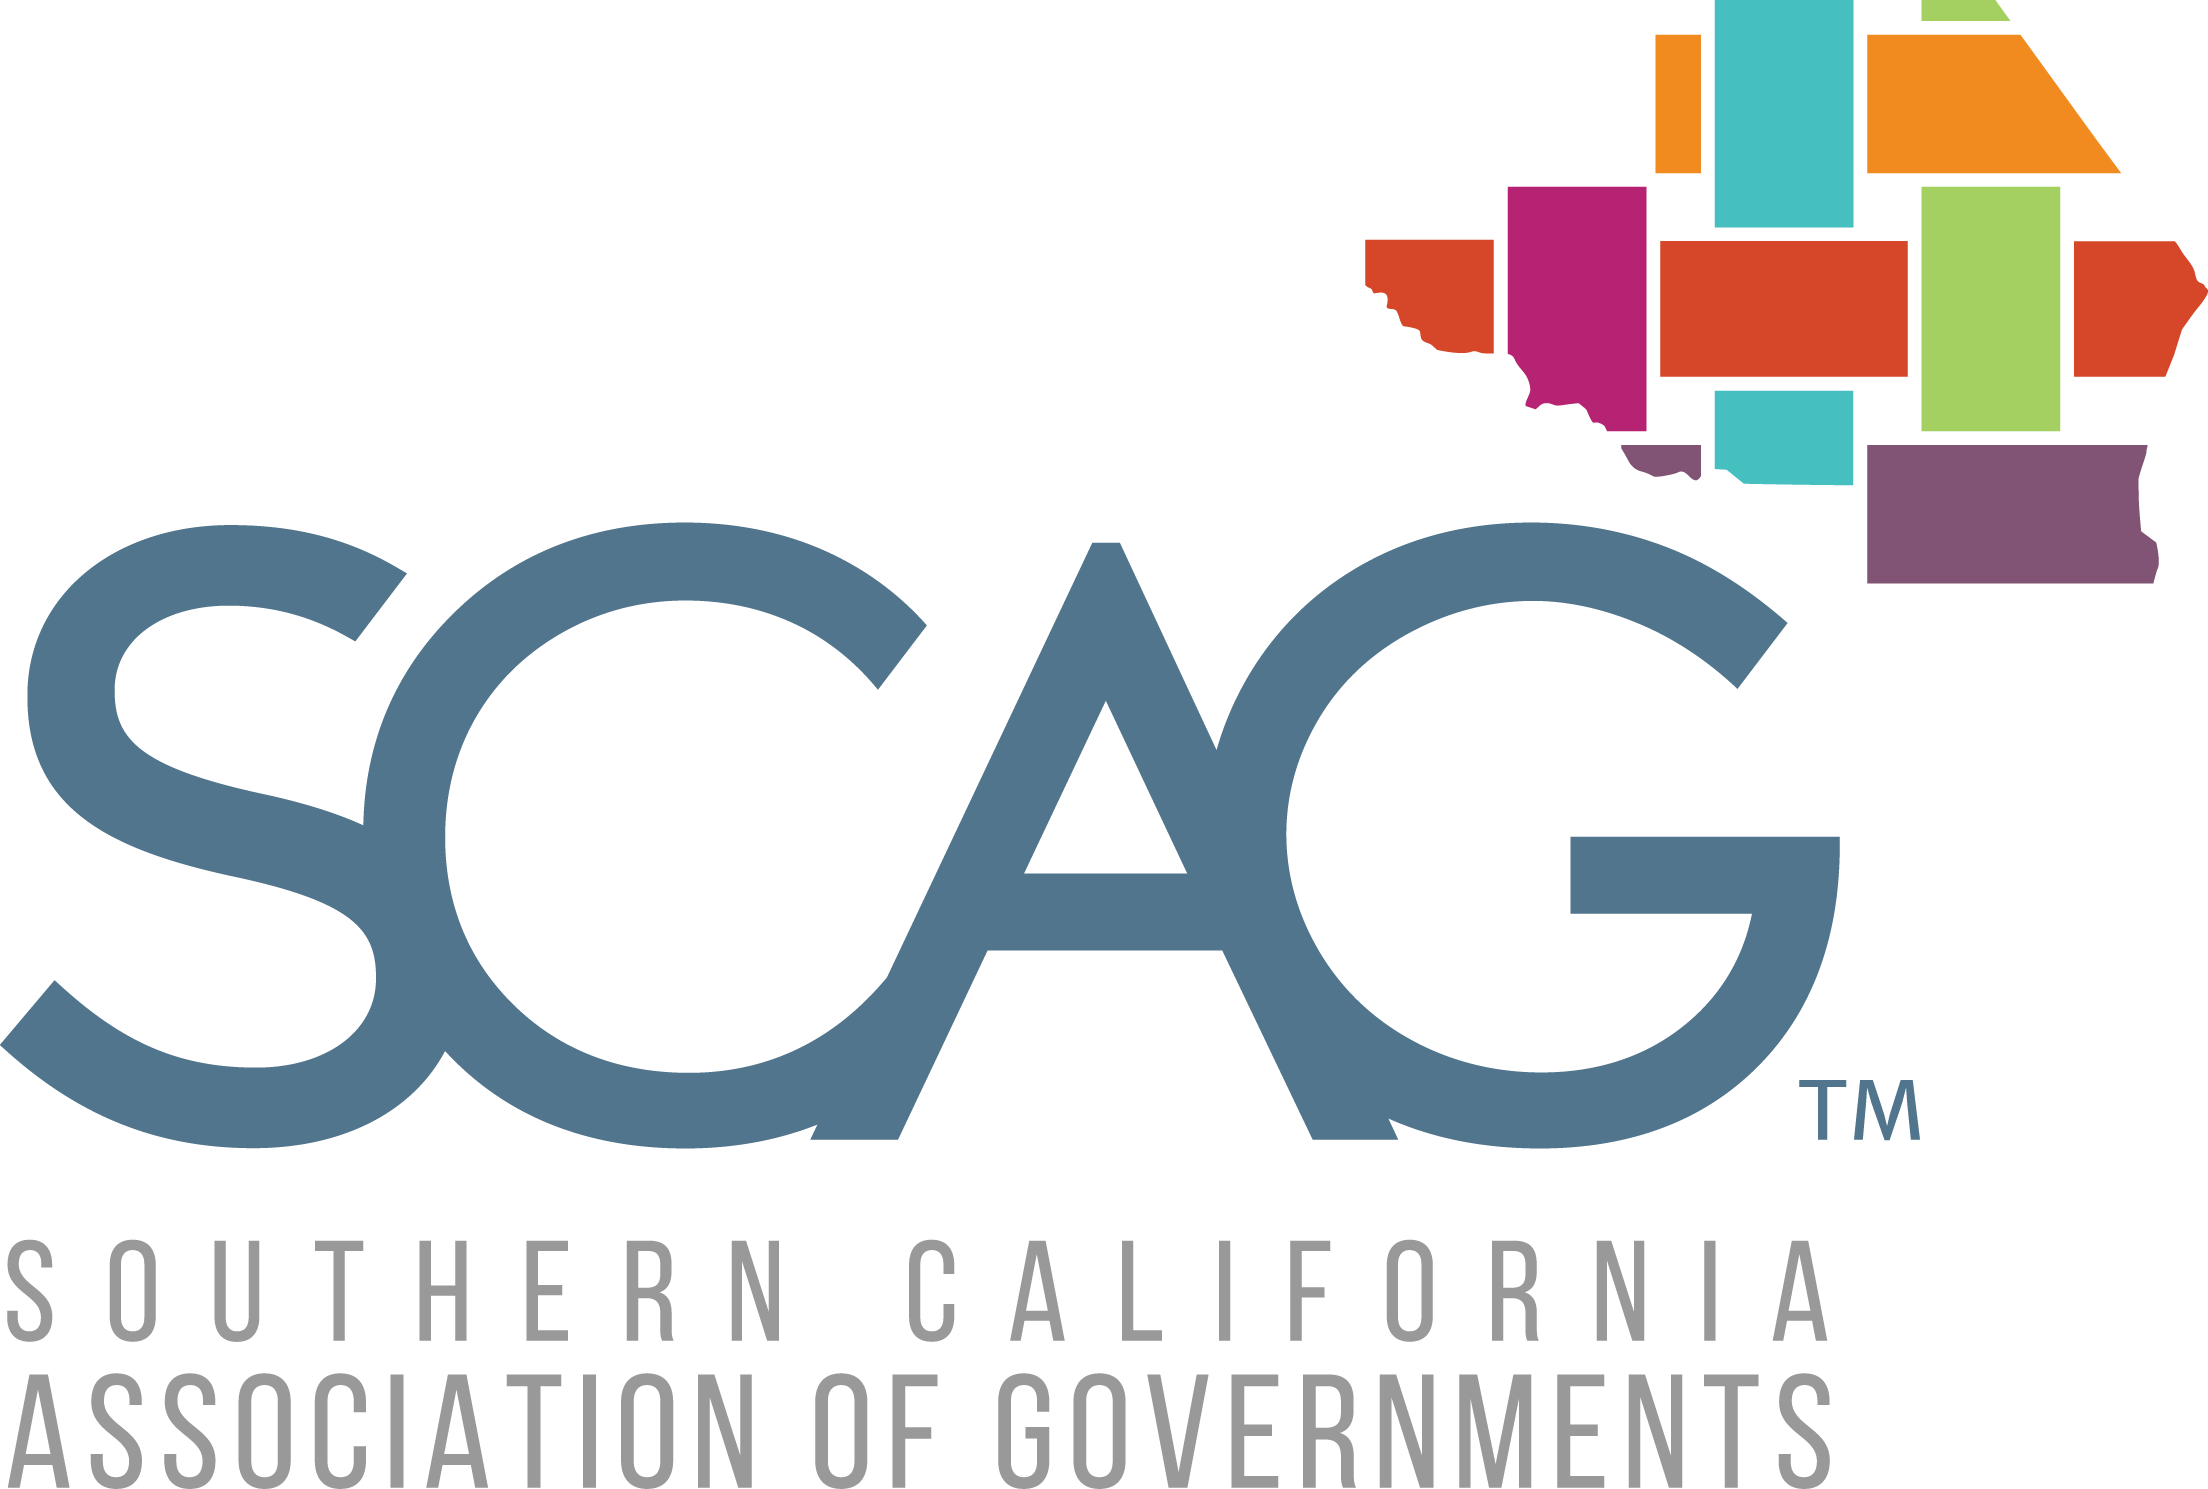 Link to Southern California Association of Governments website